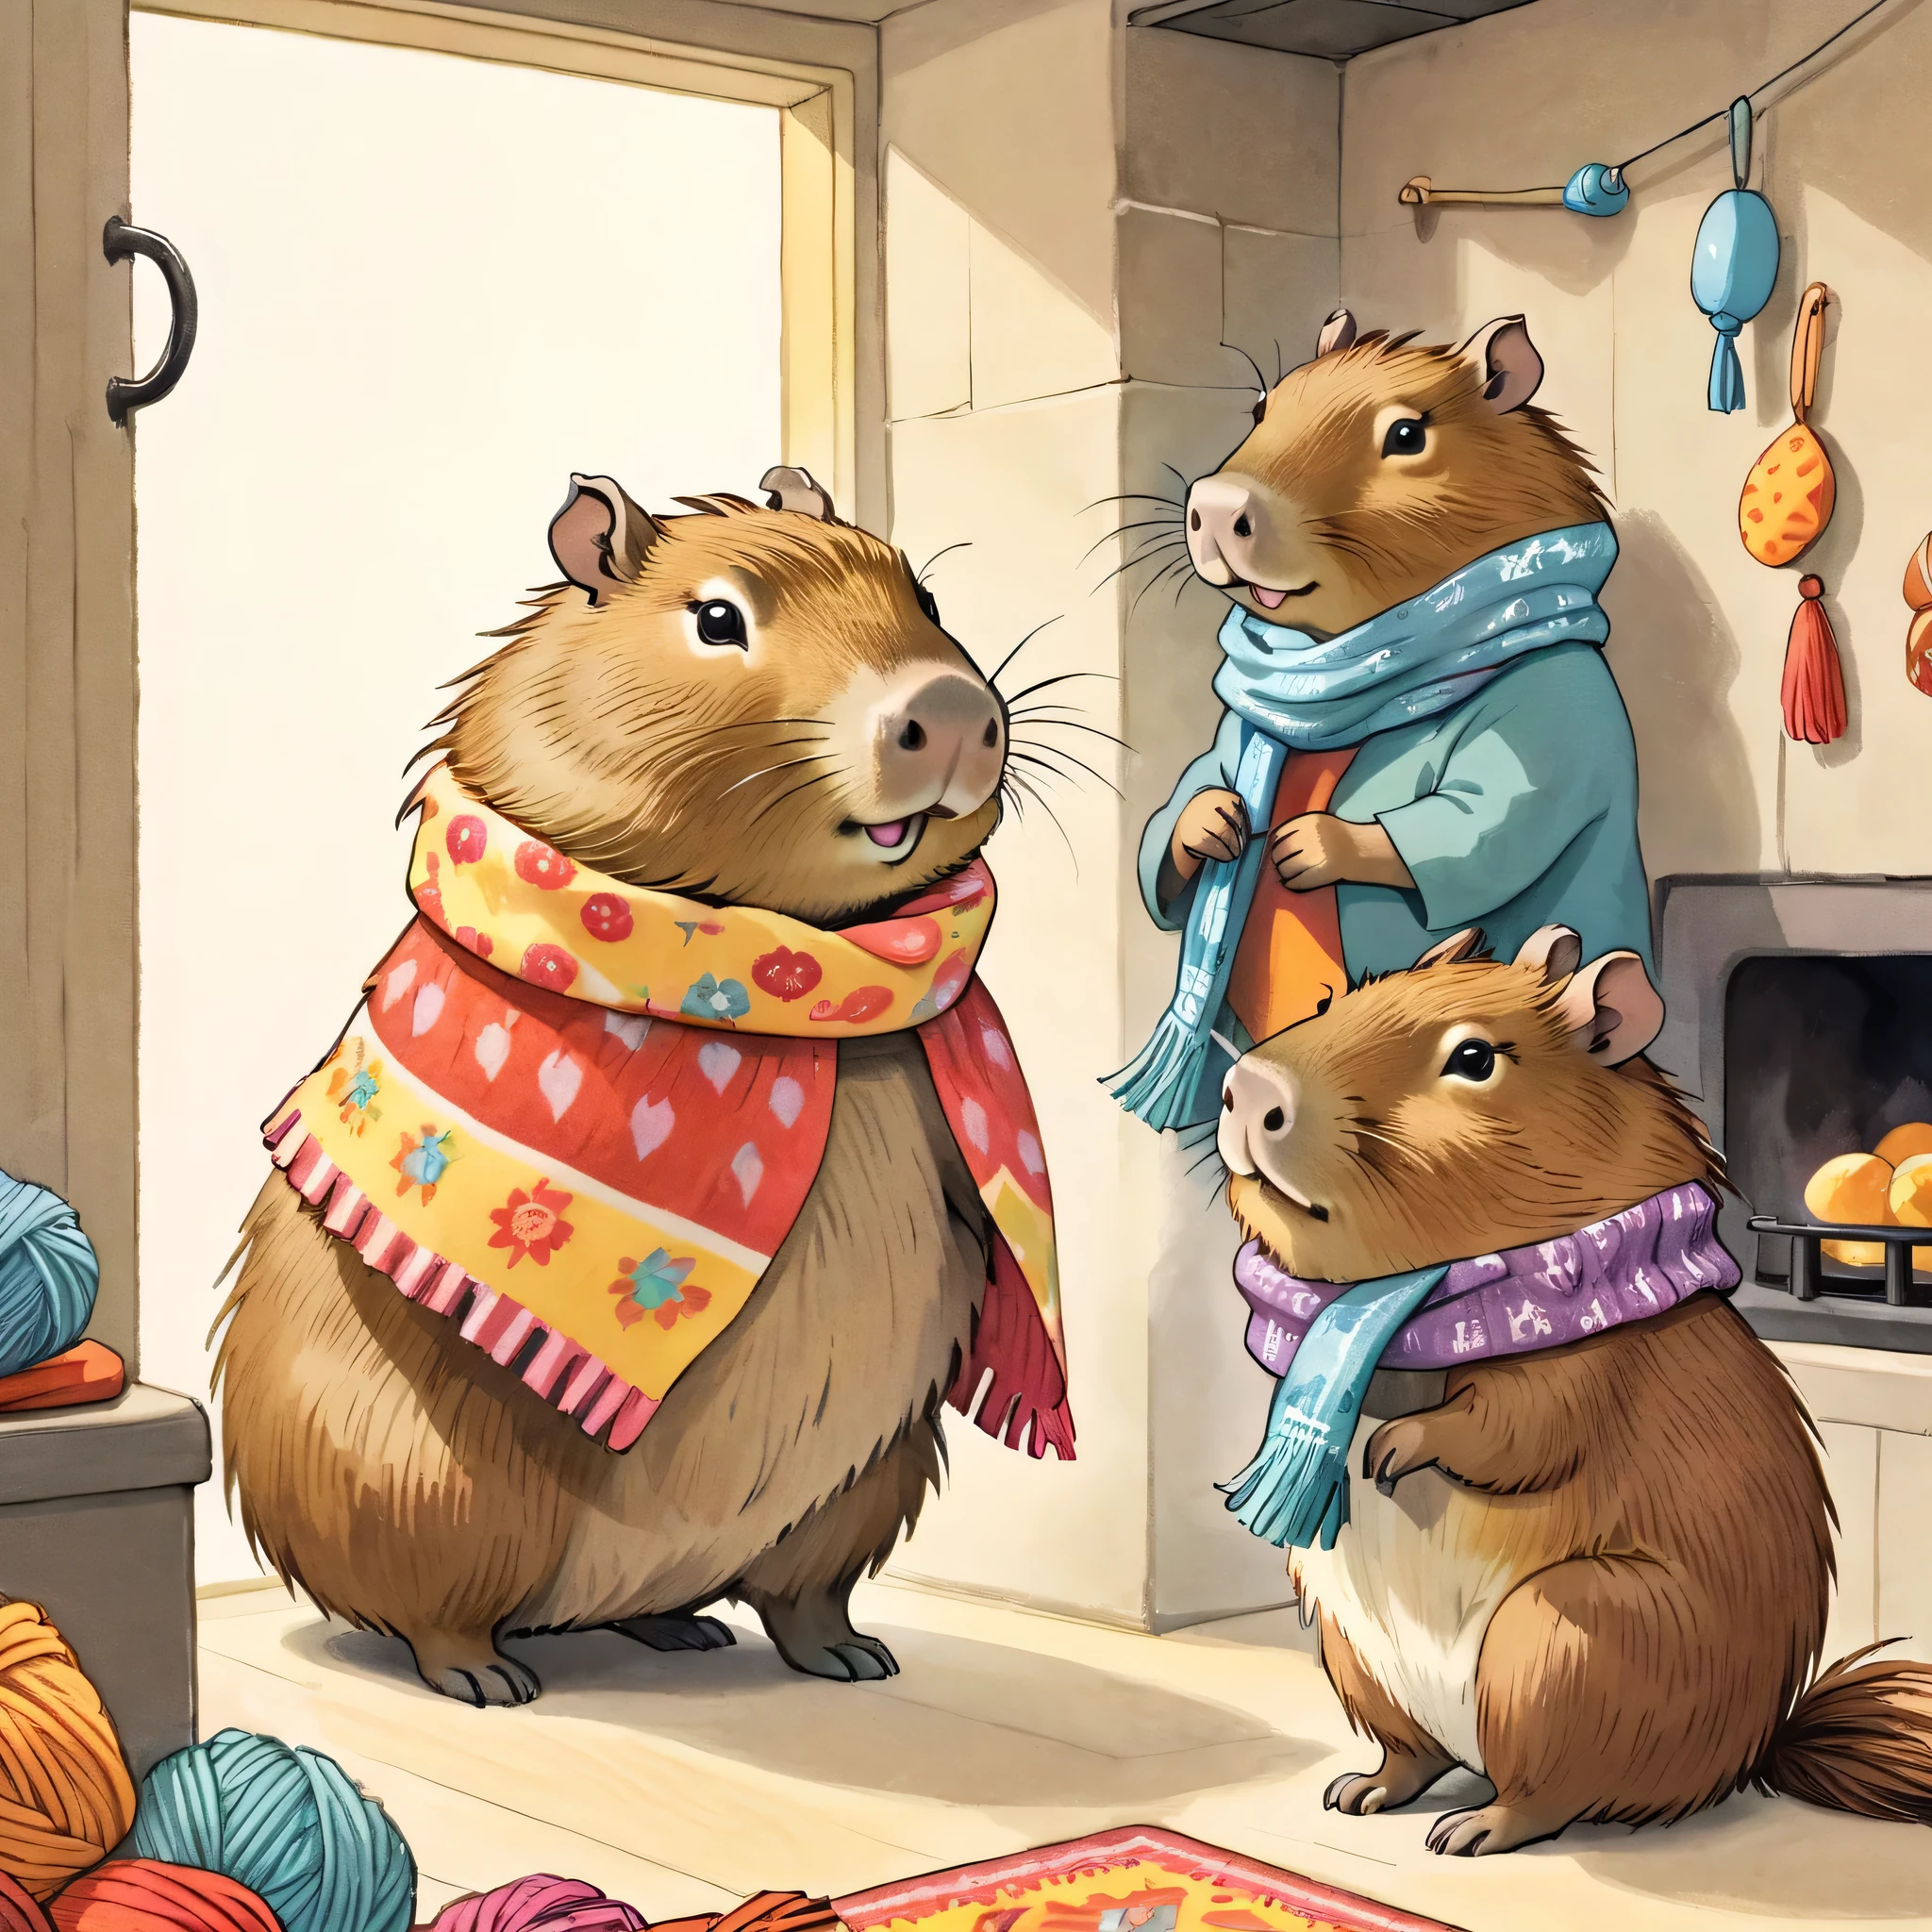 cuteAn illustration,capybara house,Capybara&#39;s Parents and Children:animal:cute:Knitting Time:looks happy,An illustration,pop,colorful,color,Capybara&#39;s Parents and Childrenが編み物を楽しんでいます:dream happy dreams,The nest is warm and full of happiness,,colorful,Fancy,Fantasy,patchwork,FamiliarDetails,fluffy,Randolph Caldecott Style,capybara,Very cute capybara,Fluffy&#39;s Capybara,Anatomically correct,cute,stylish,Shine,Soft texture,Lovely,,Randolph Caldecott Style,Capybara knitting blankets ,Knee hanging, scarf,heating stove,, An illustration for a children&#39;s picture book, (colorfulなAn illustration:1.4), An illustration from a magazine, (Dynamic pose), Familiar, Complex, beautiful, wonderful, Cinematic, wonderful ,Outstanding color, In the style of An illustration for the book by Randolph and Beatrix Potter